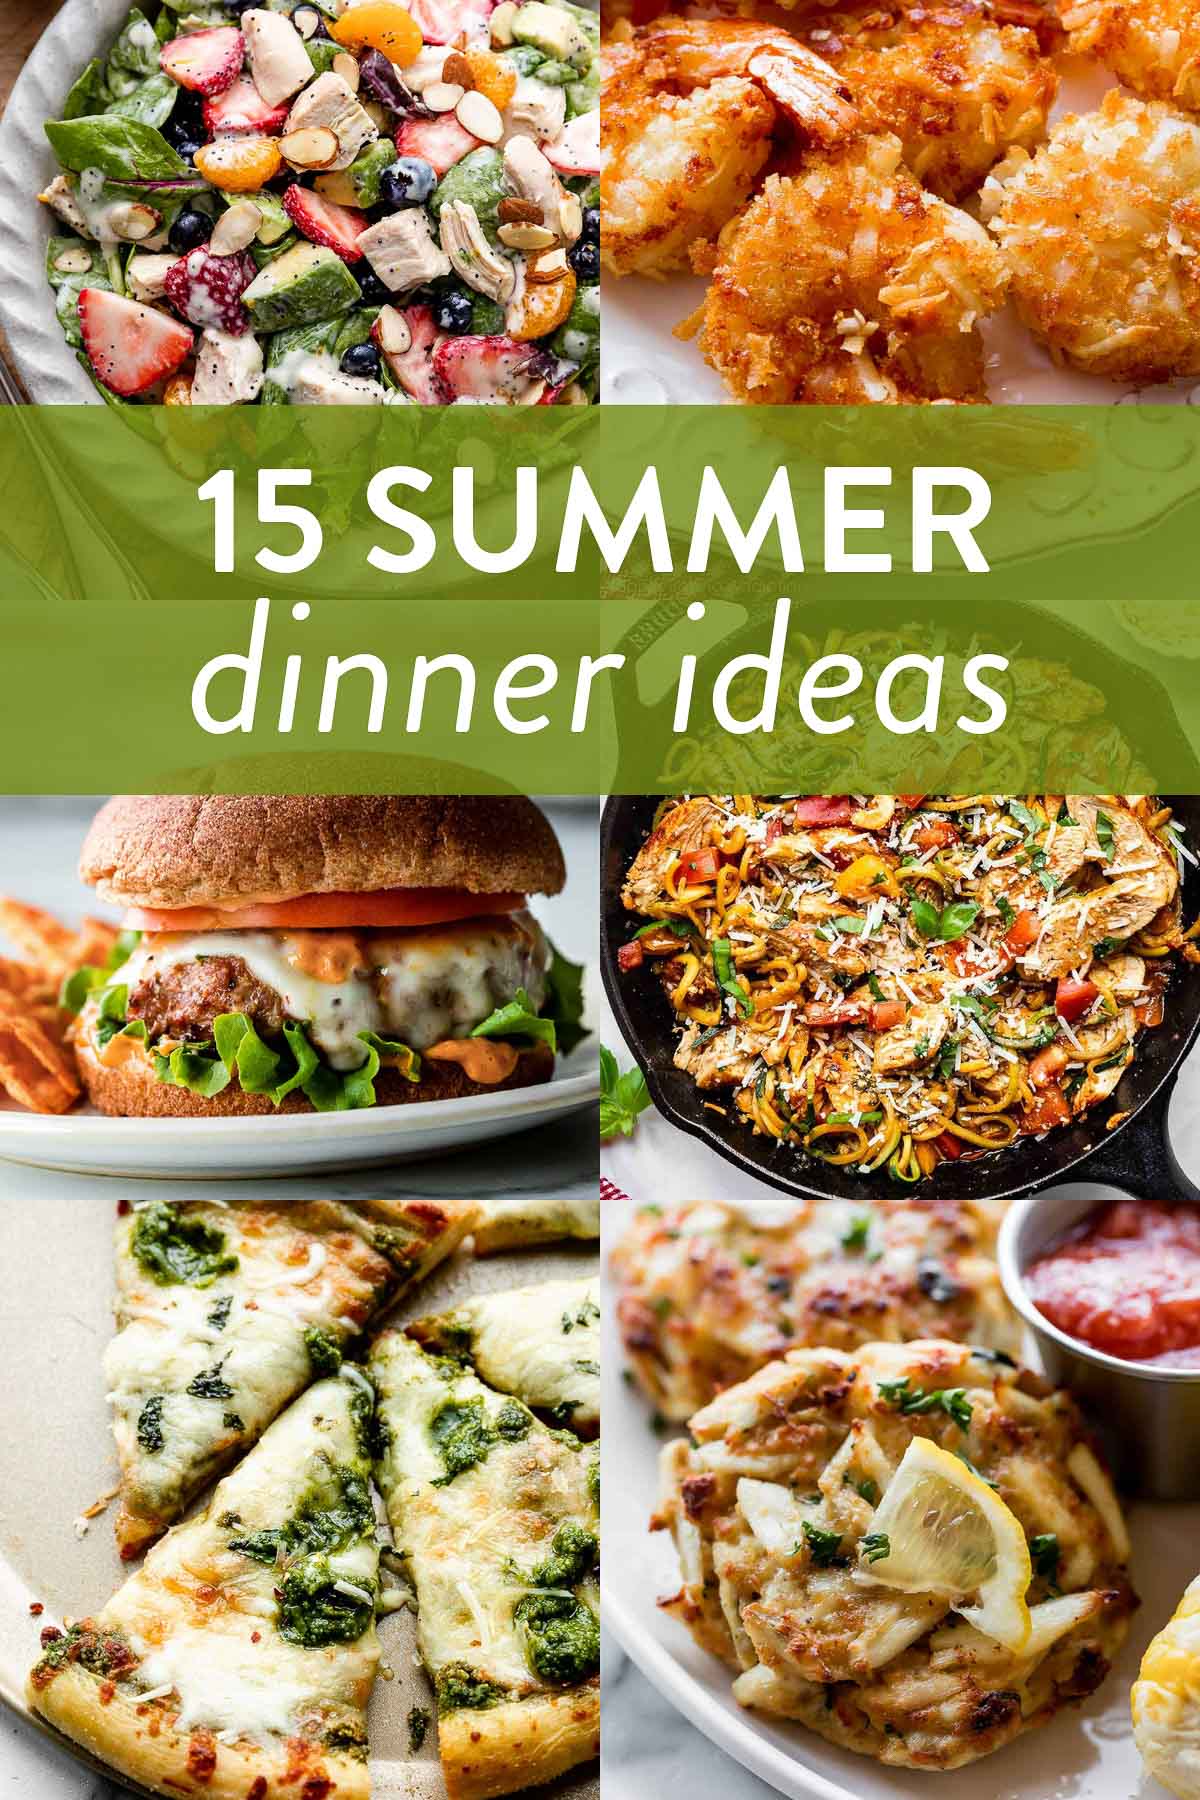 collage of summer dinner recipe photos including coconut shrimp, turkey burgers, strawberry chicken salad, crab cakes, and pesto pizza.